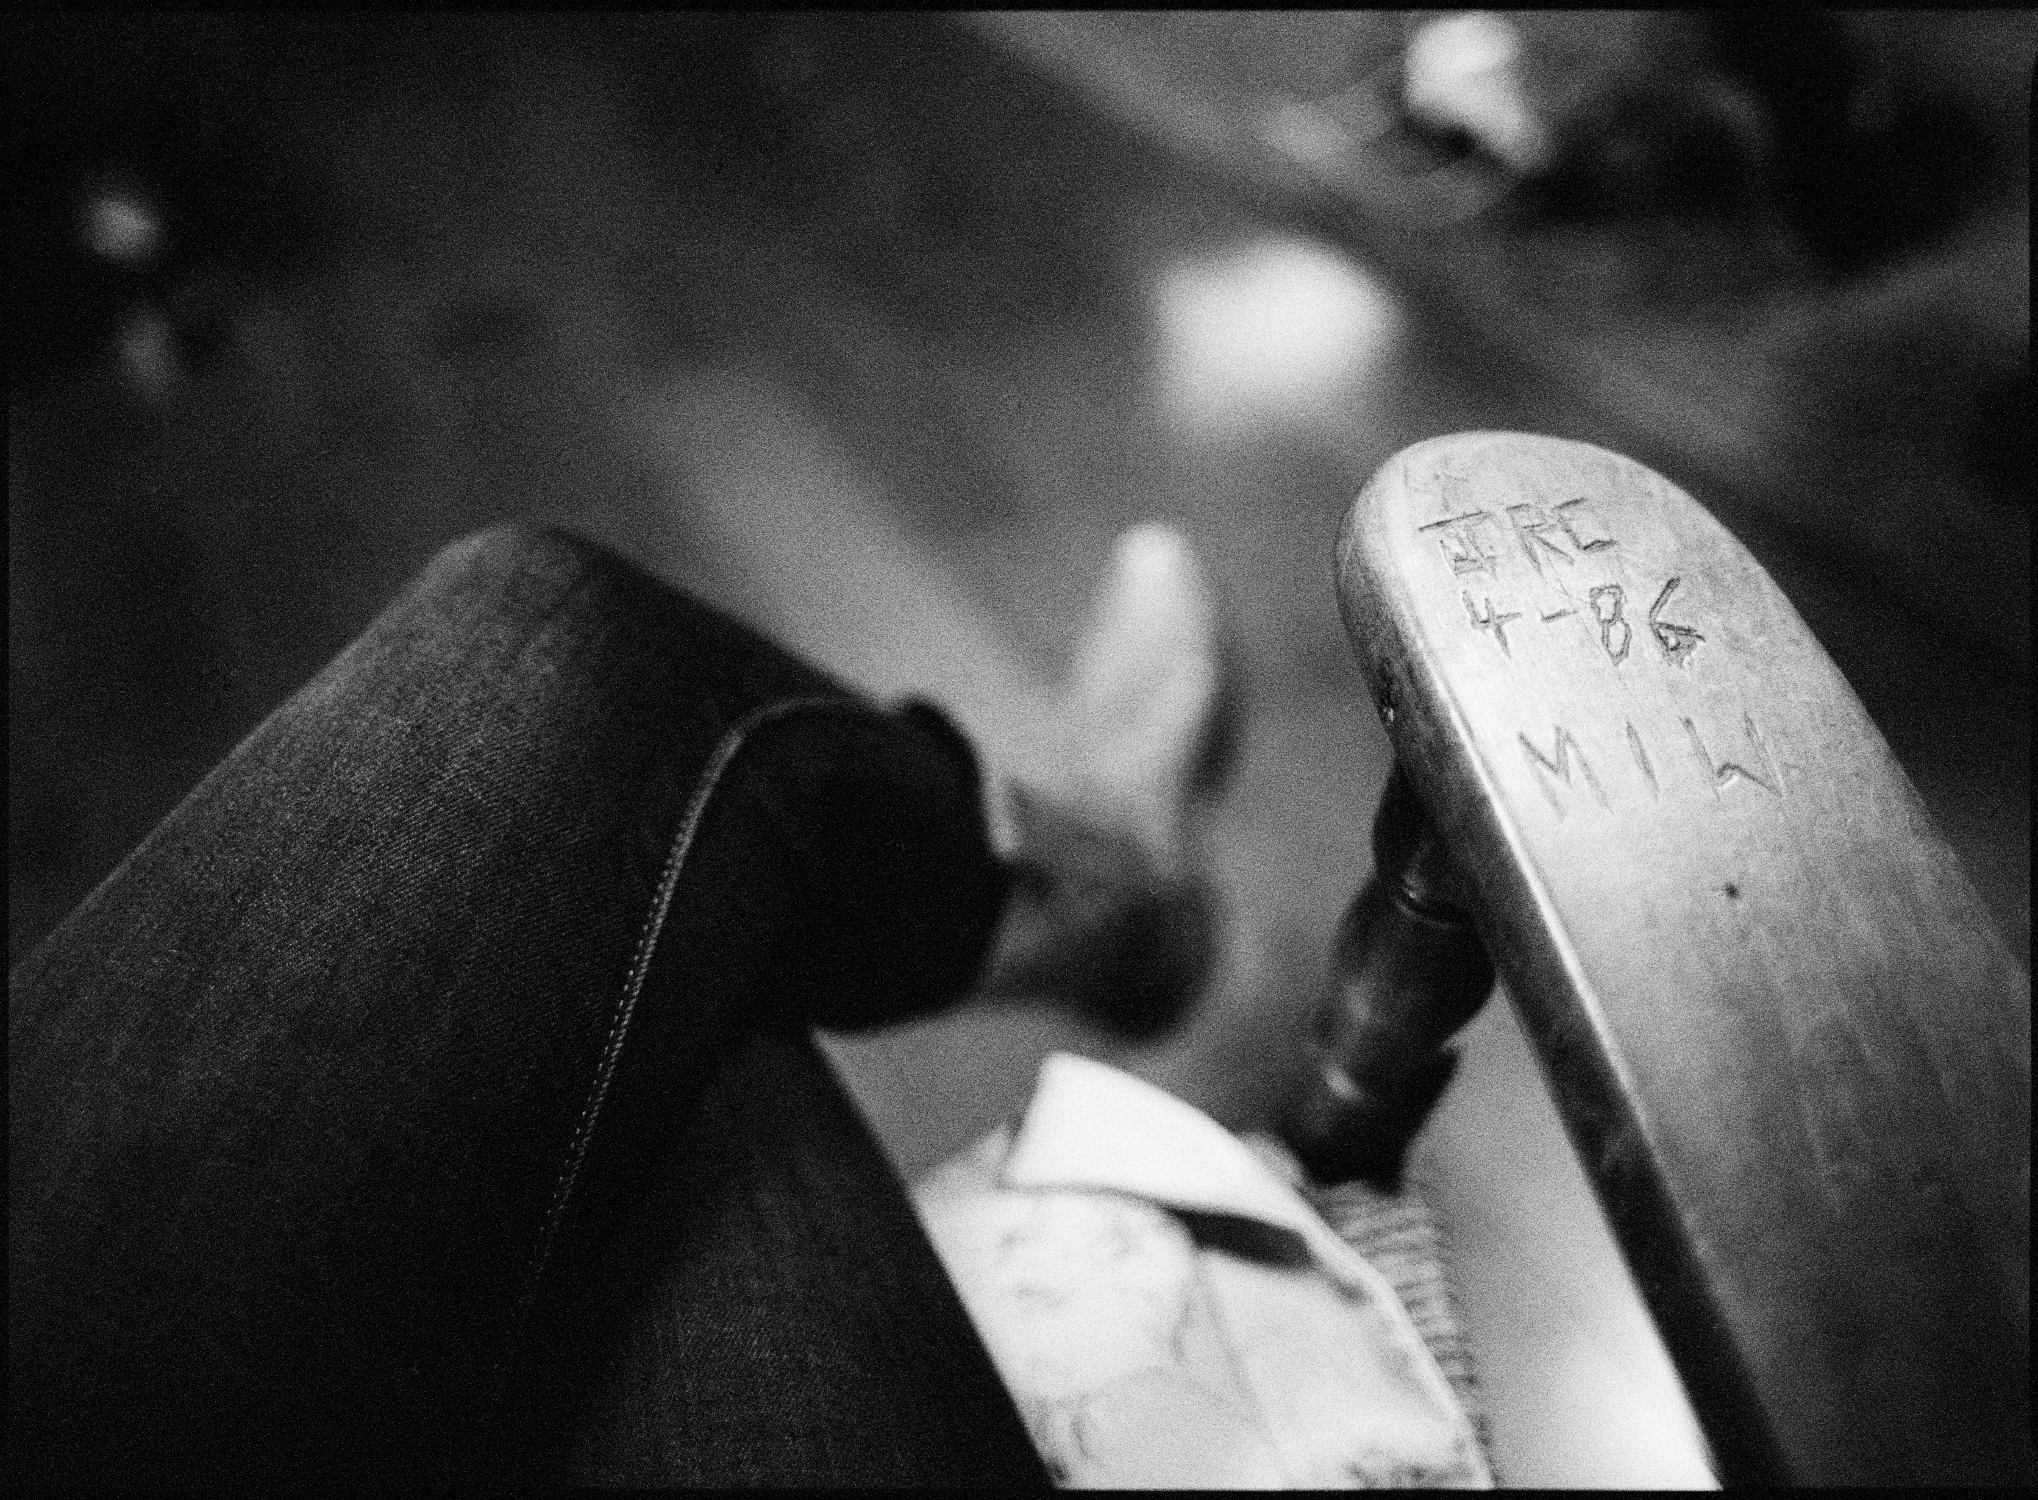 Johnny Cash's rocking chair and initials, LP's boot